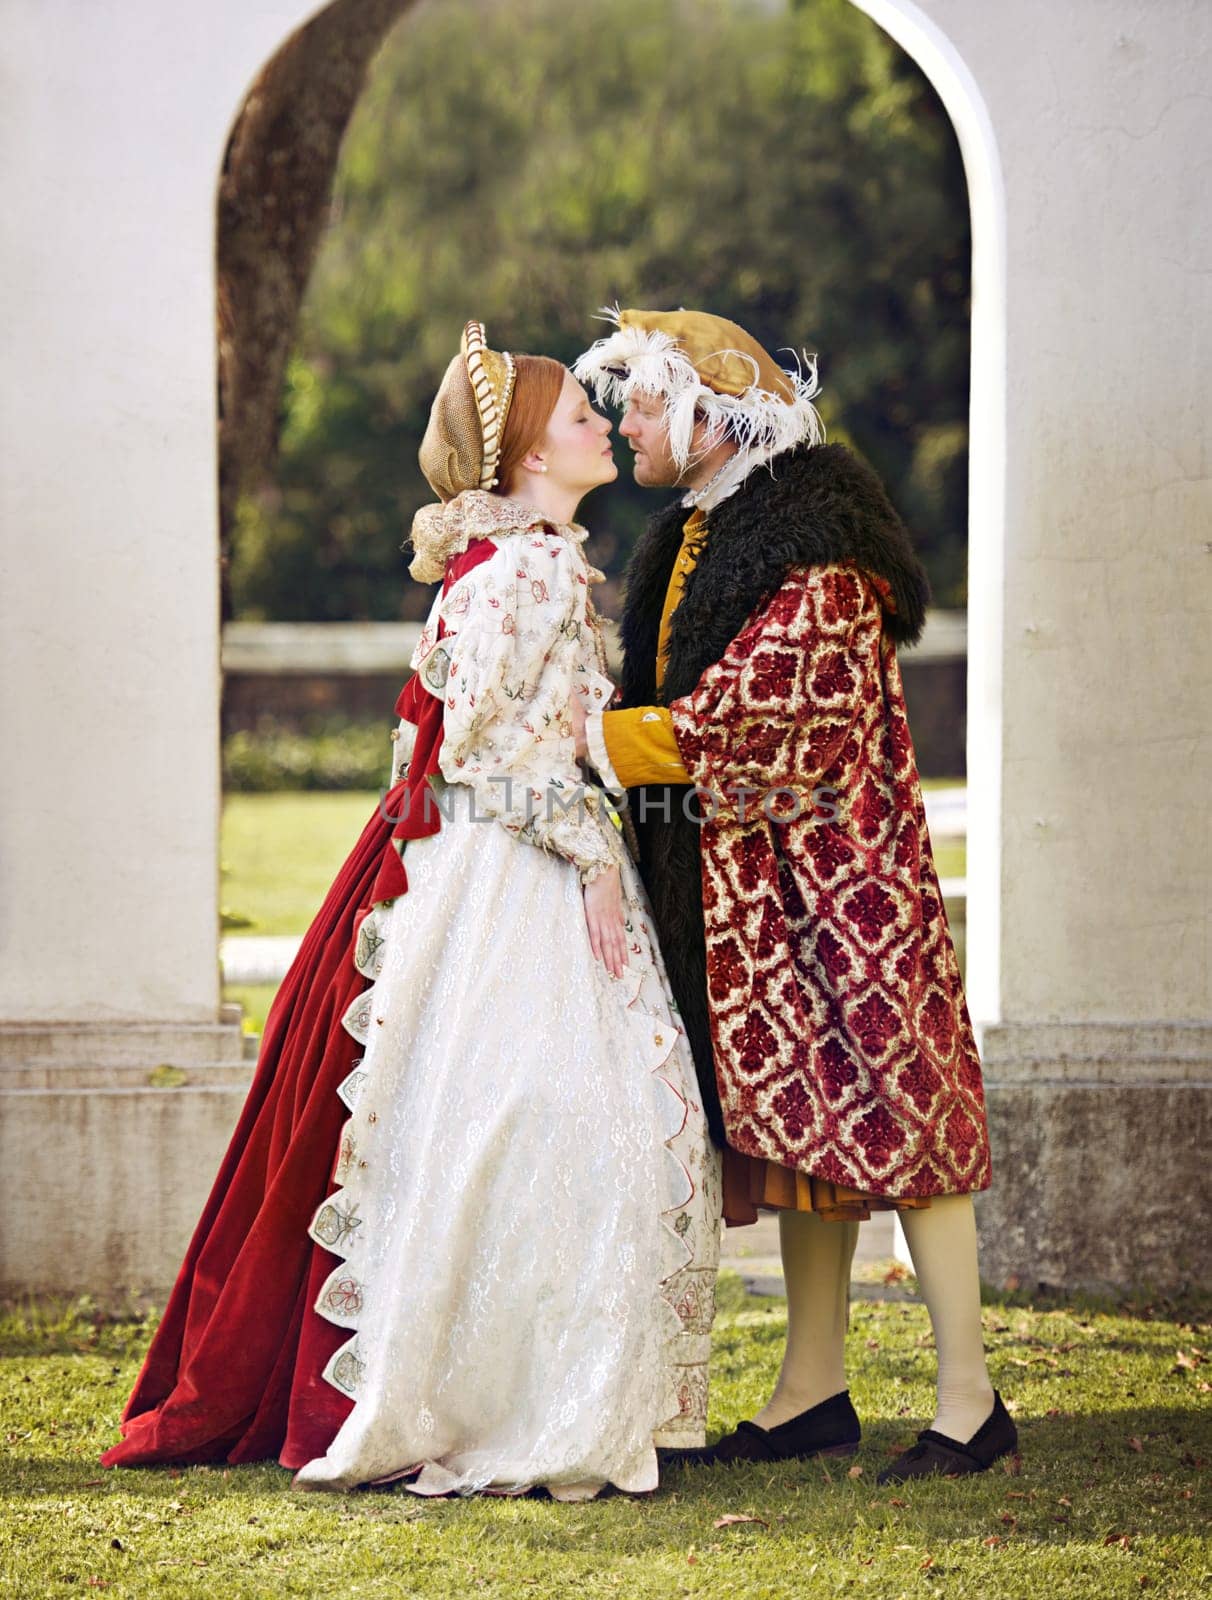 Medieval, king and couple kiss in marriage with renaissance fashion outdoor with marriage and love. Vintage, garden and royal leader with queen together on lawn with victorian and theater costume.